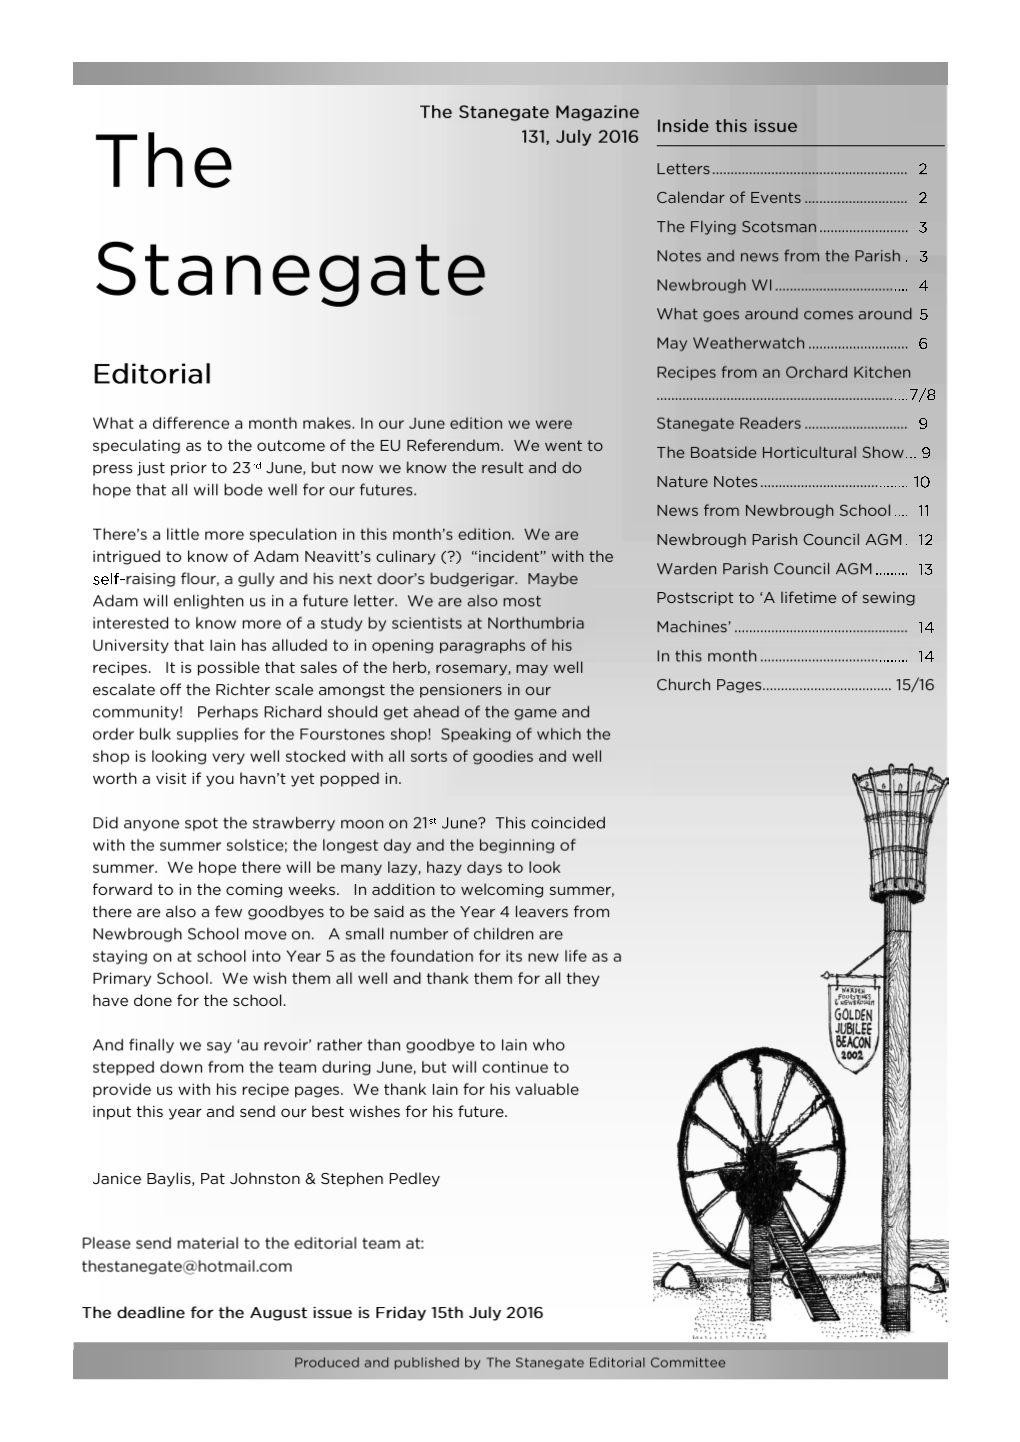 The Stanegate July 2016.Pdf